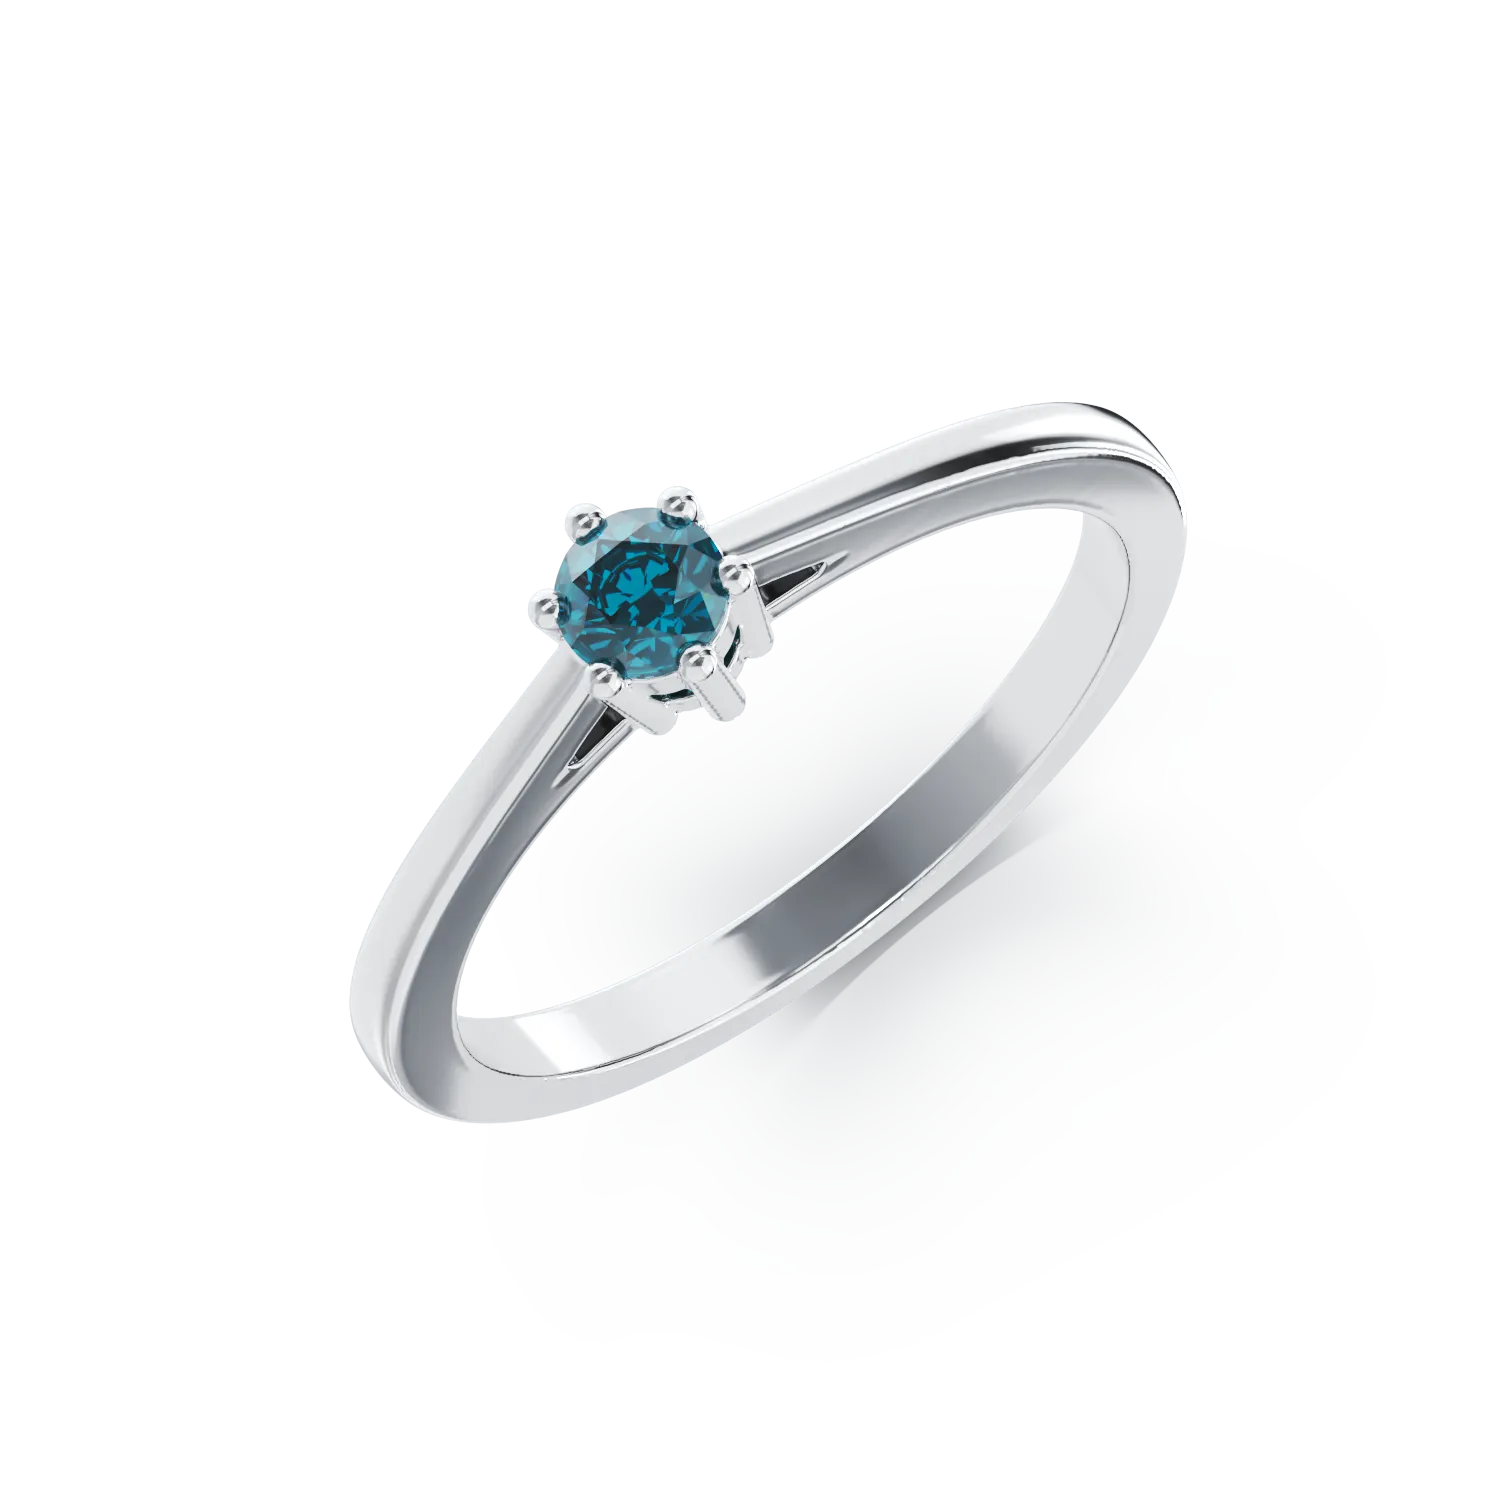 18K white gold engagement ring with 0.3ct blue diamond